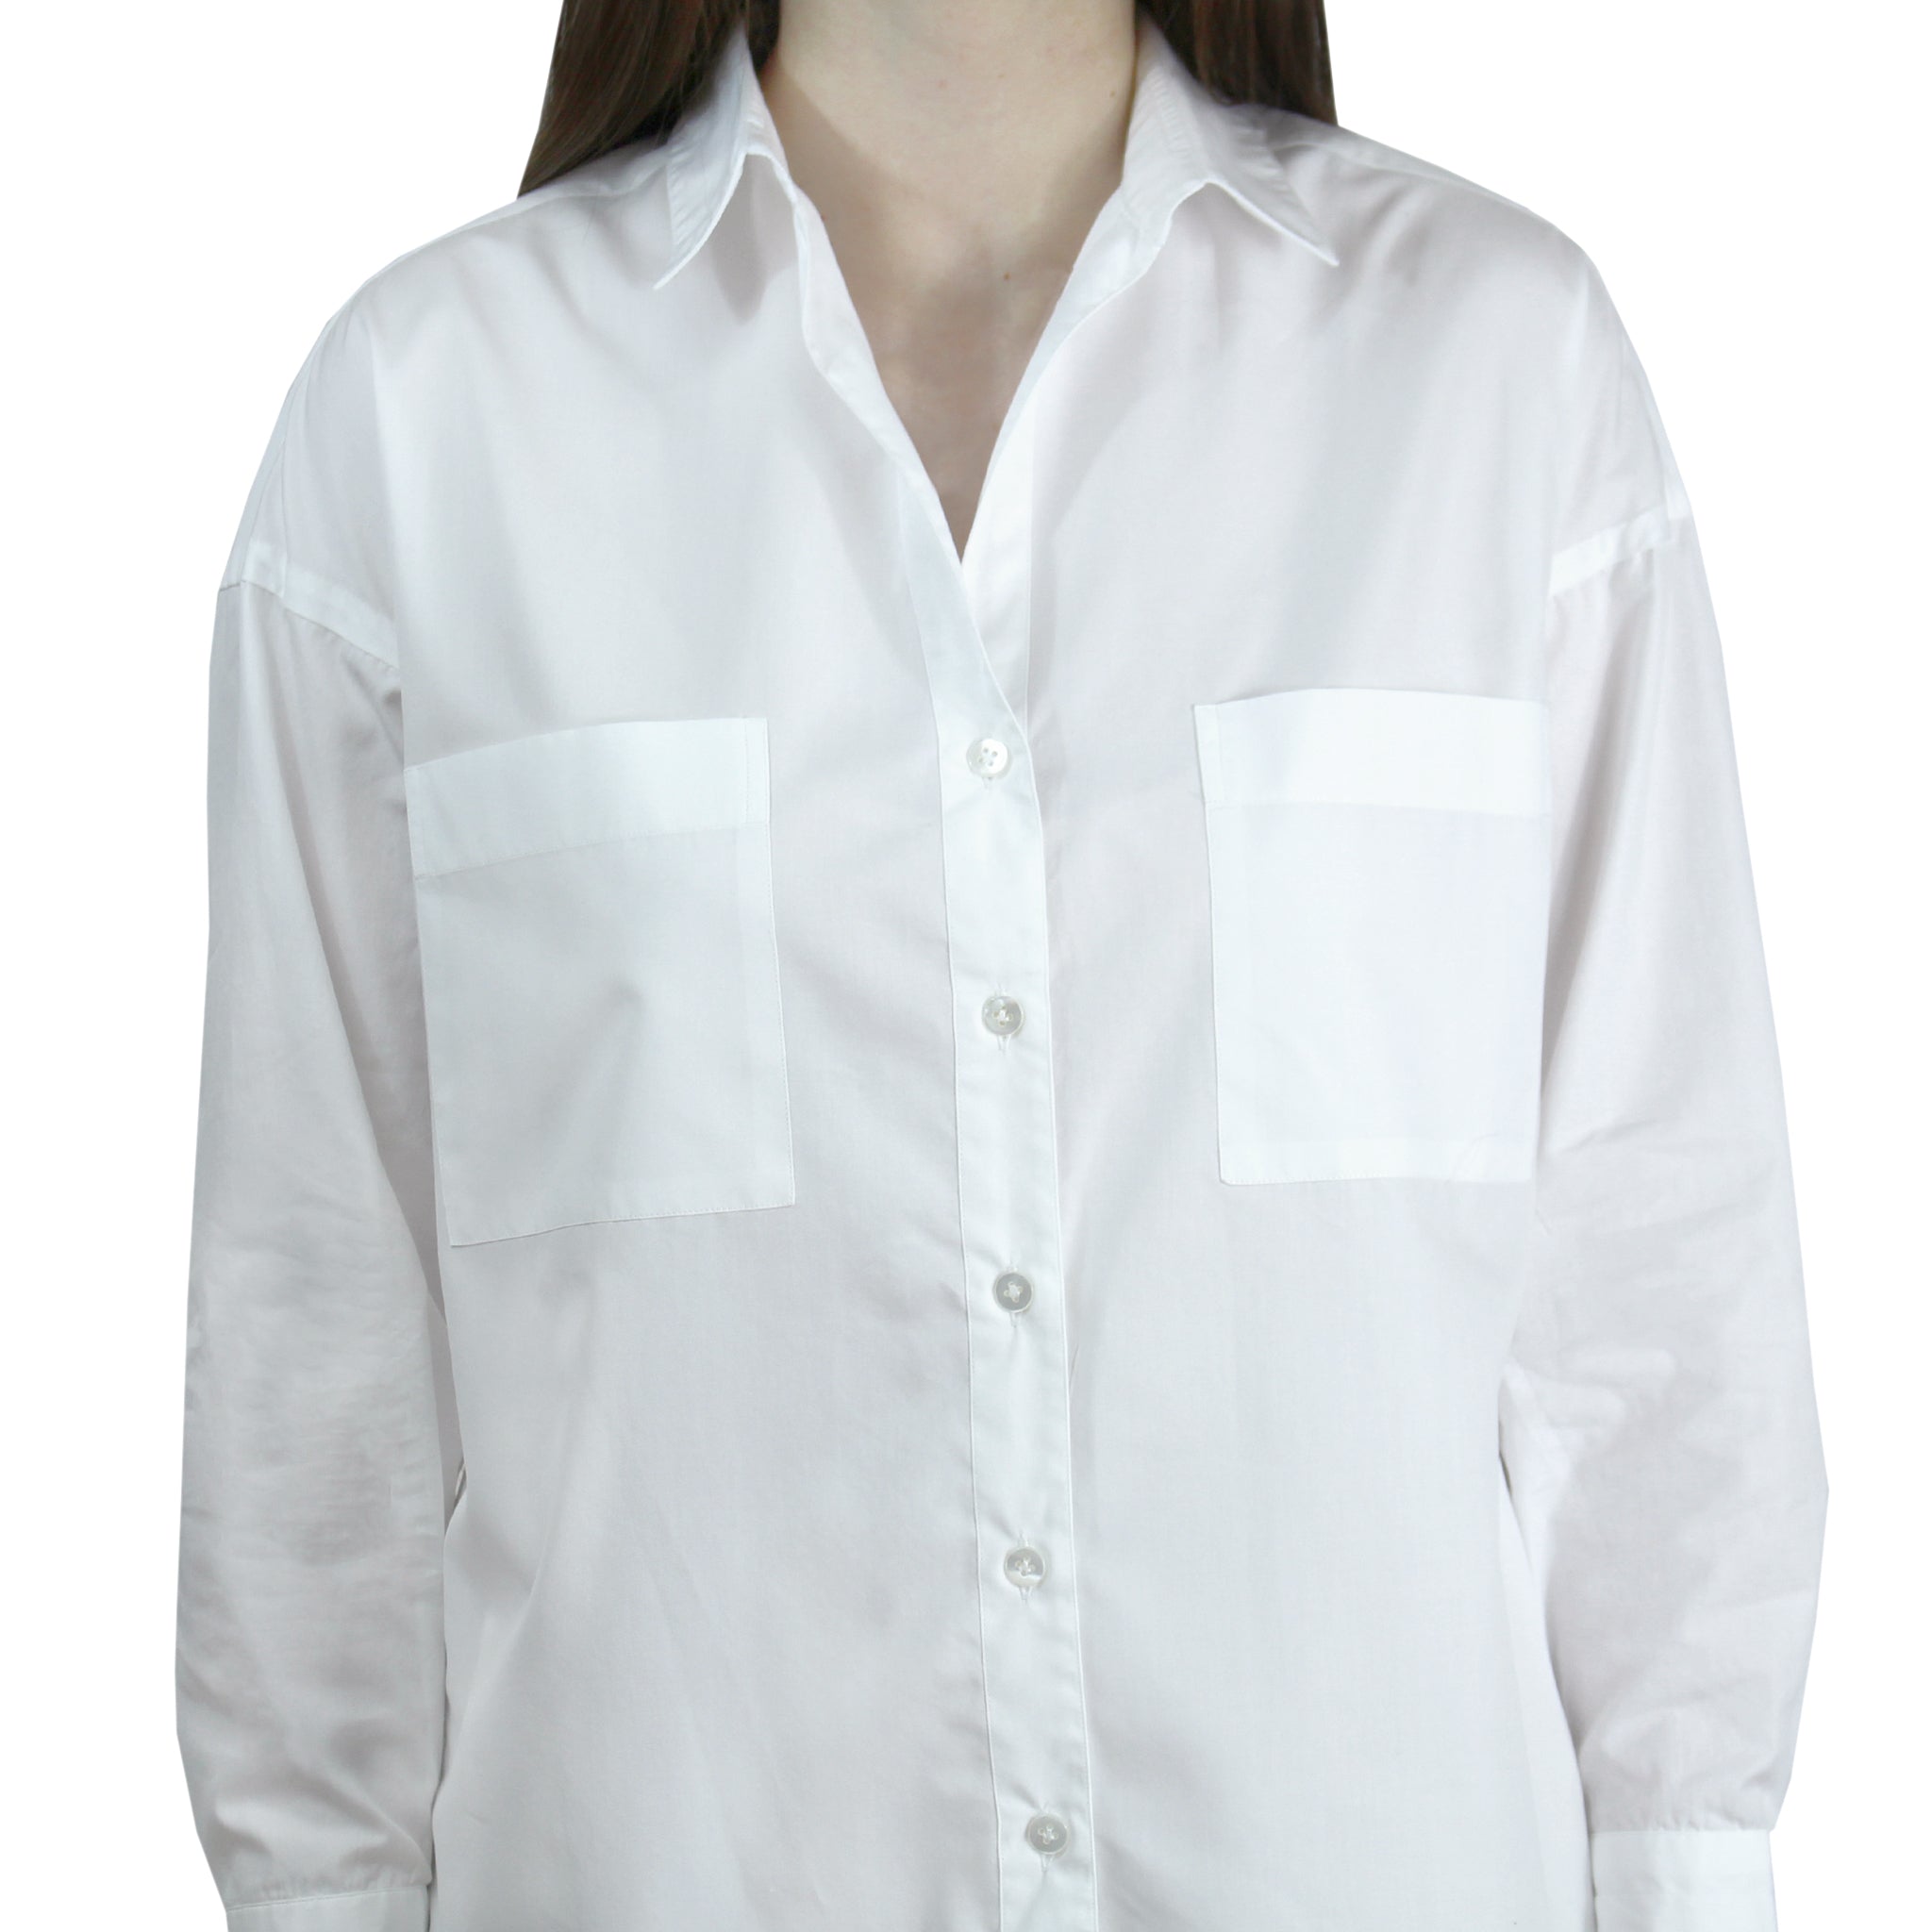 White popeline shirt with pockets and webbing to adjust the sleeve